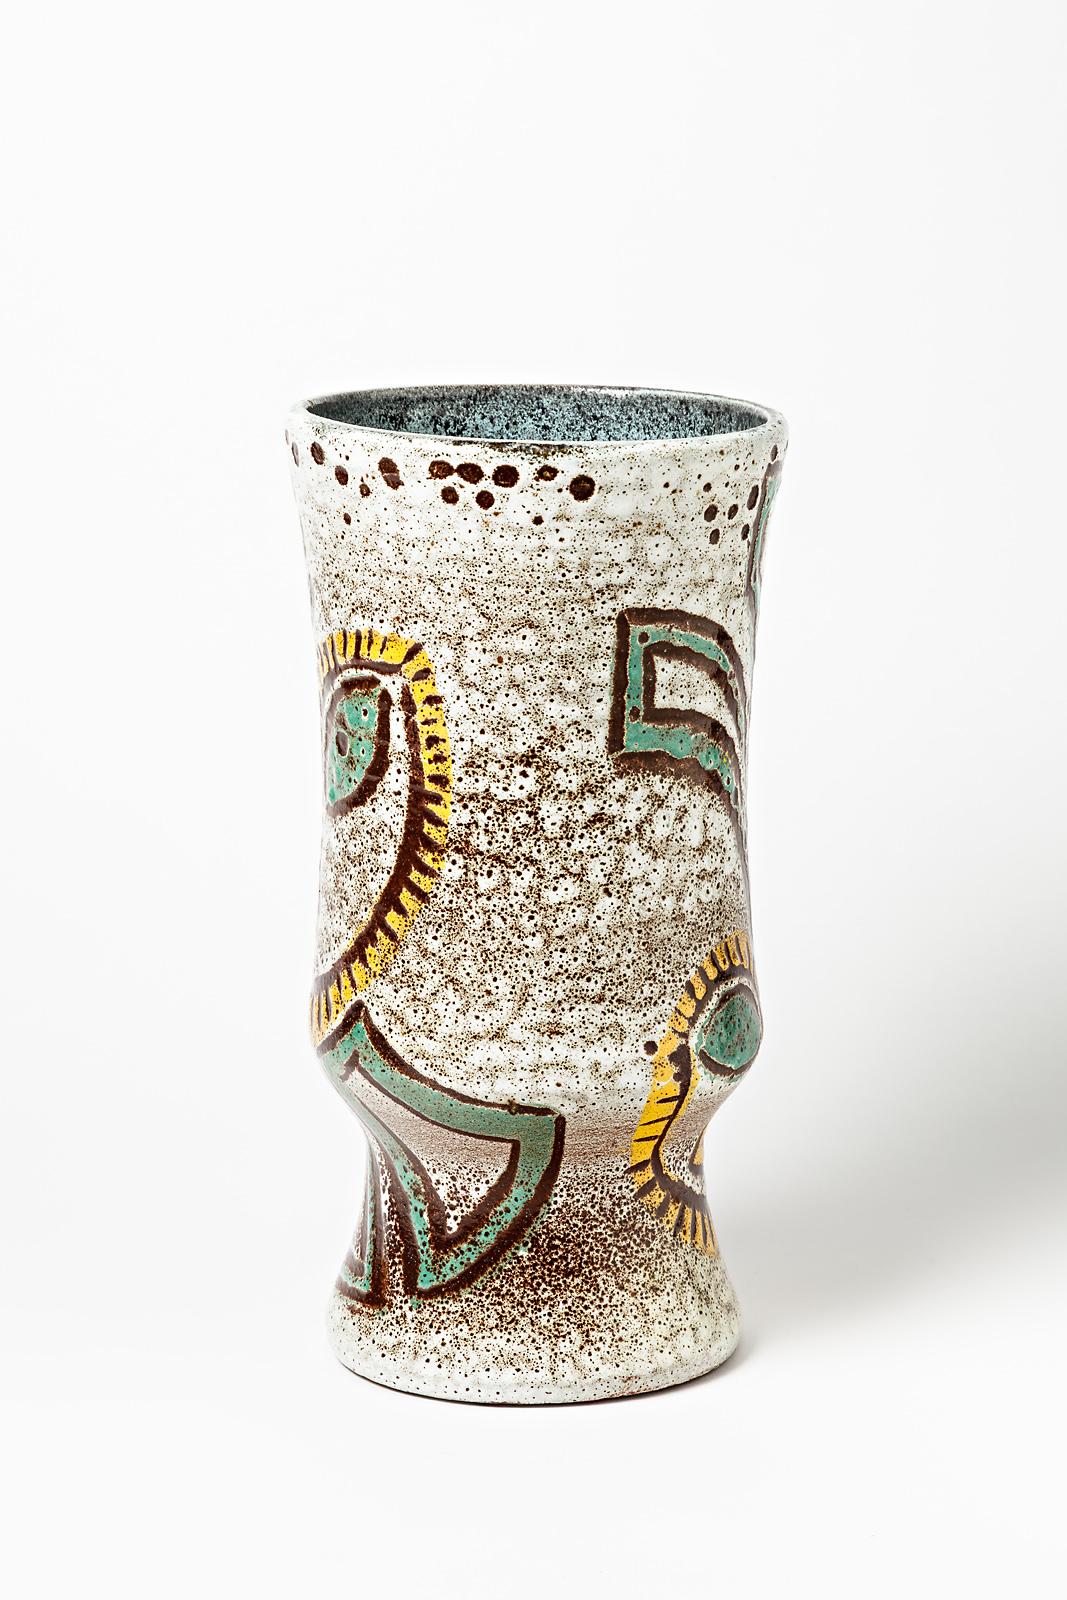 Accolay

Exceptional important ceramic vase by French Production Accolay, circa 1950.

Mid-20th century decorative vase.

Original perfect condition, signed under the base.

Decorative grey, yellow and green colors.

Measures: Height 37cm,